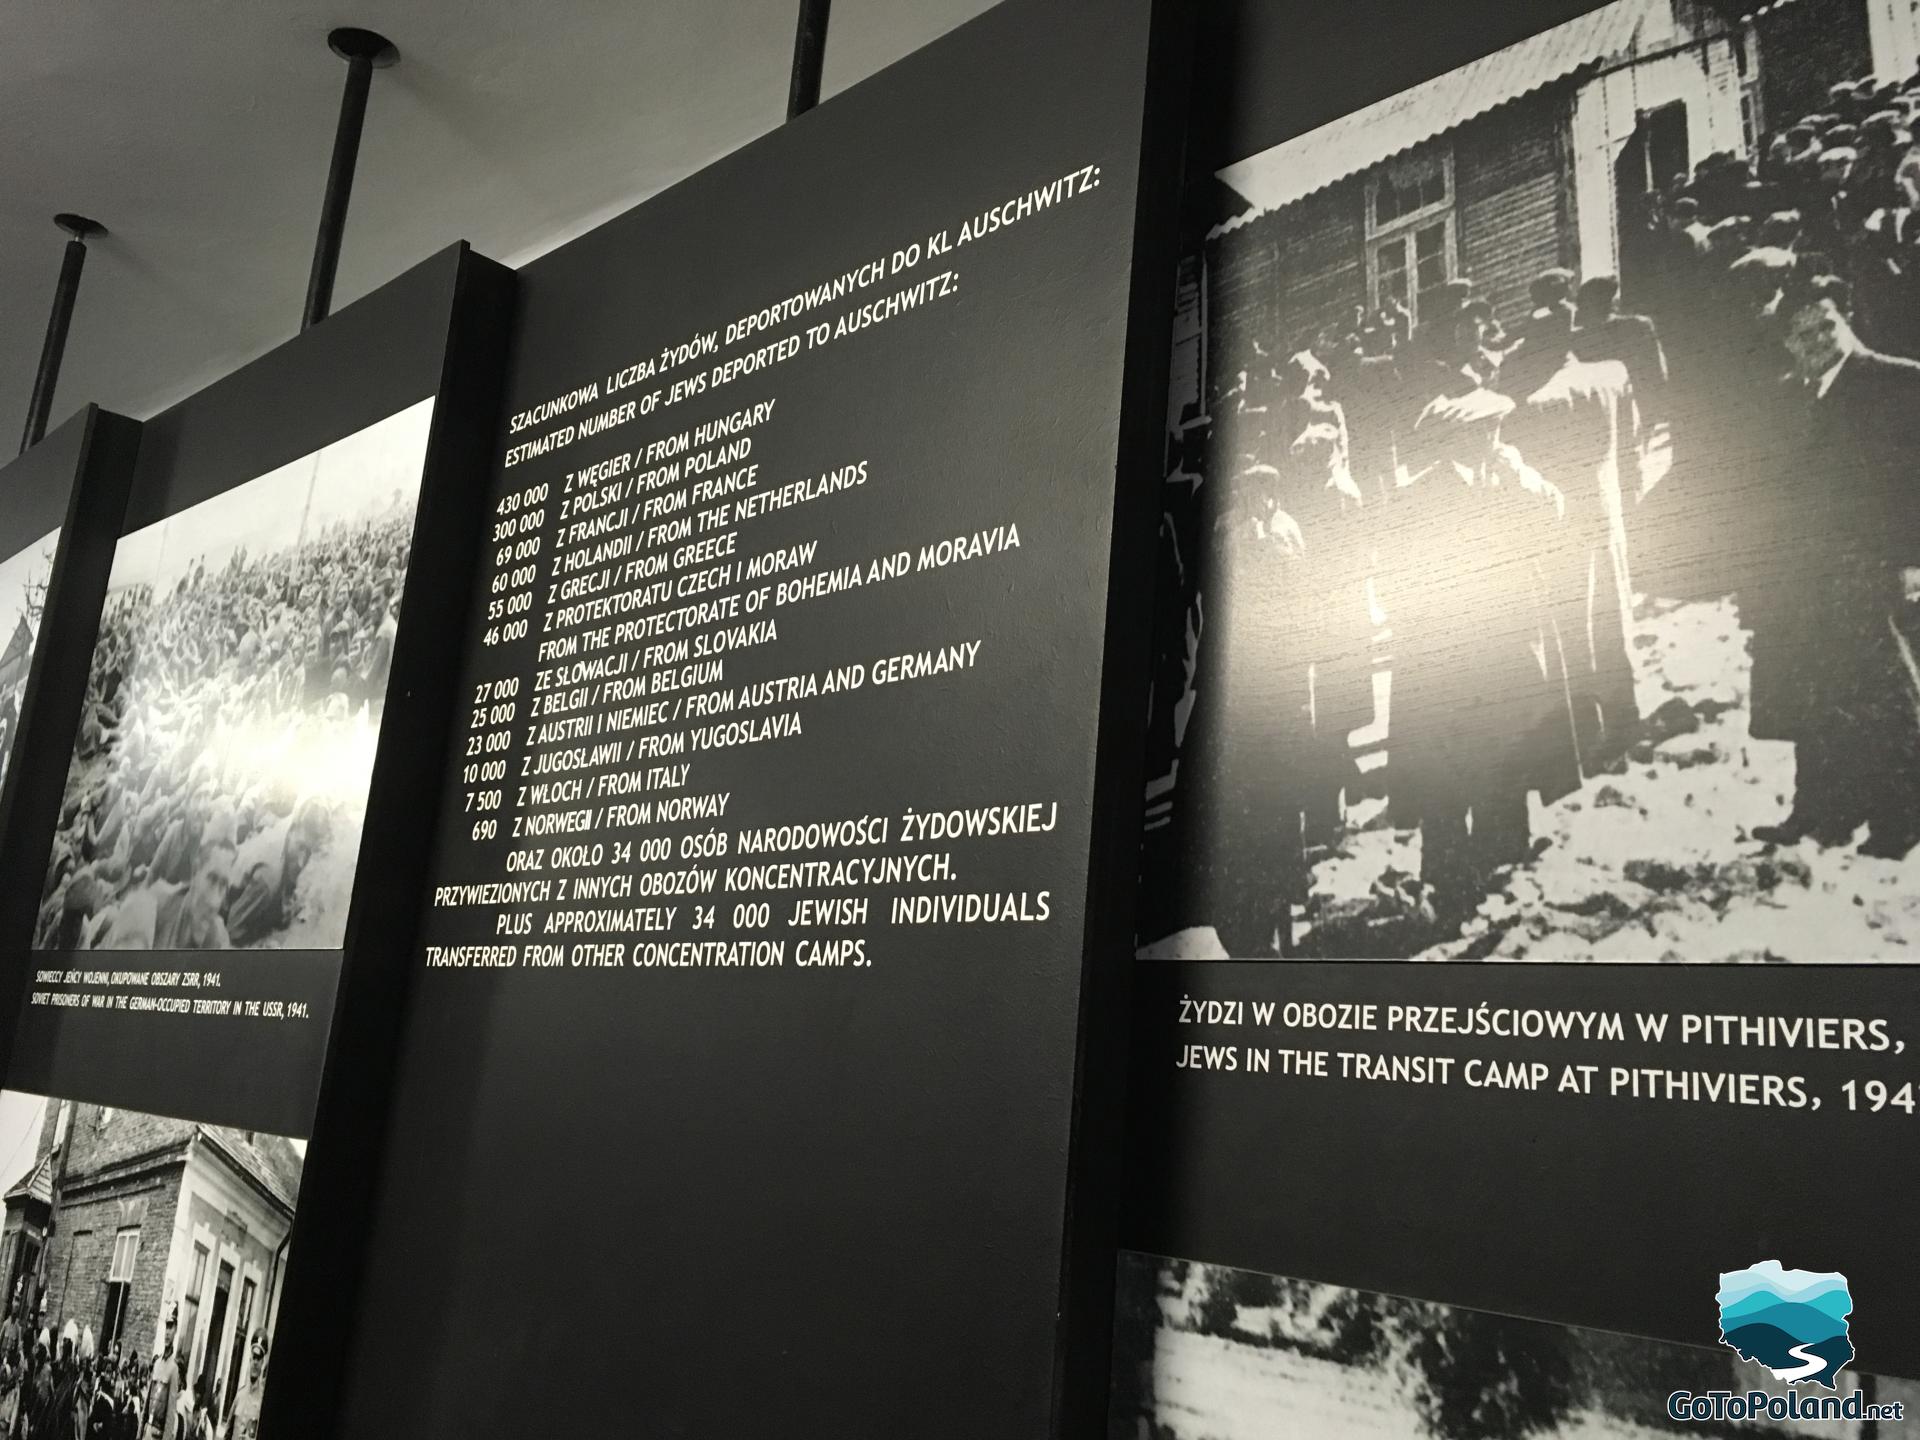 Information board with the number of Jewish prisoners from various countries sent to Auschwitz